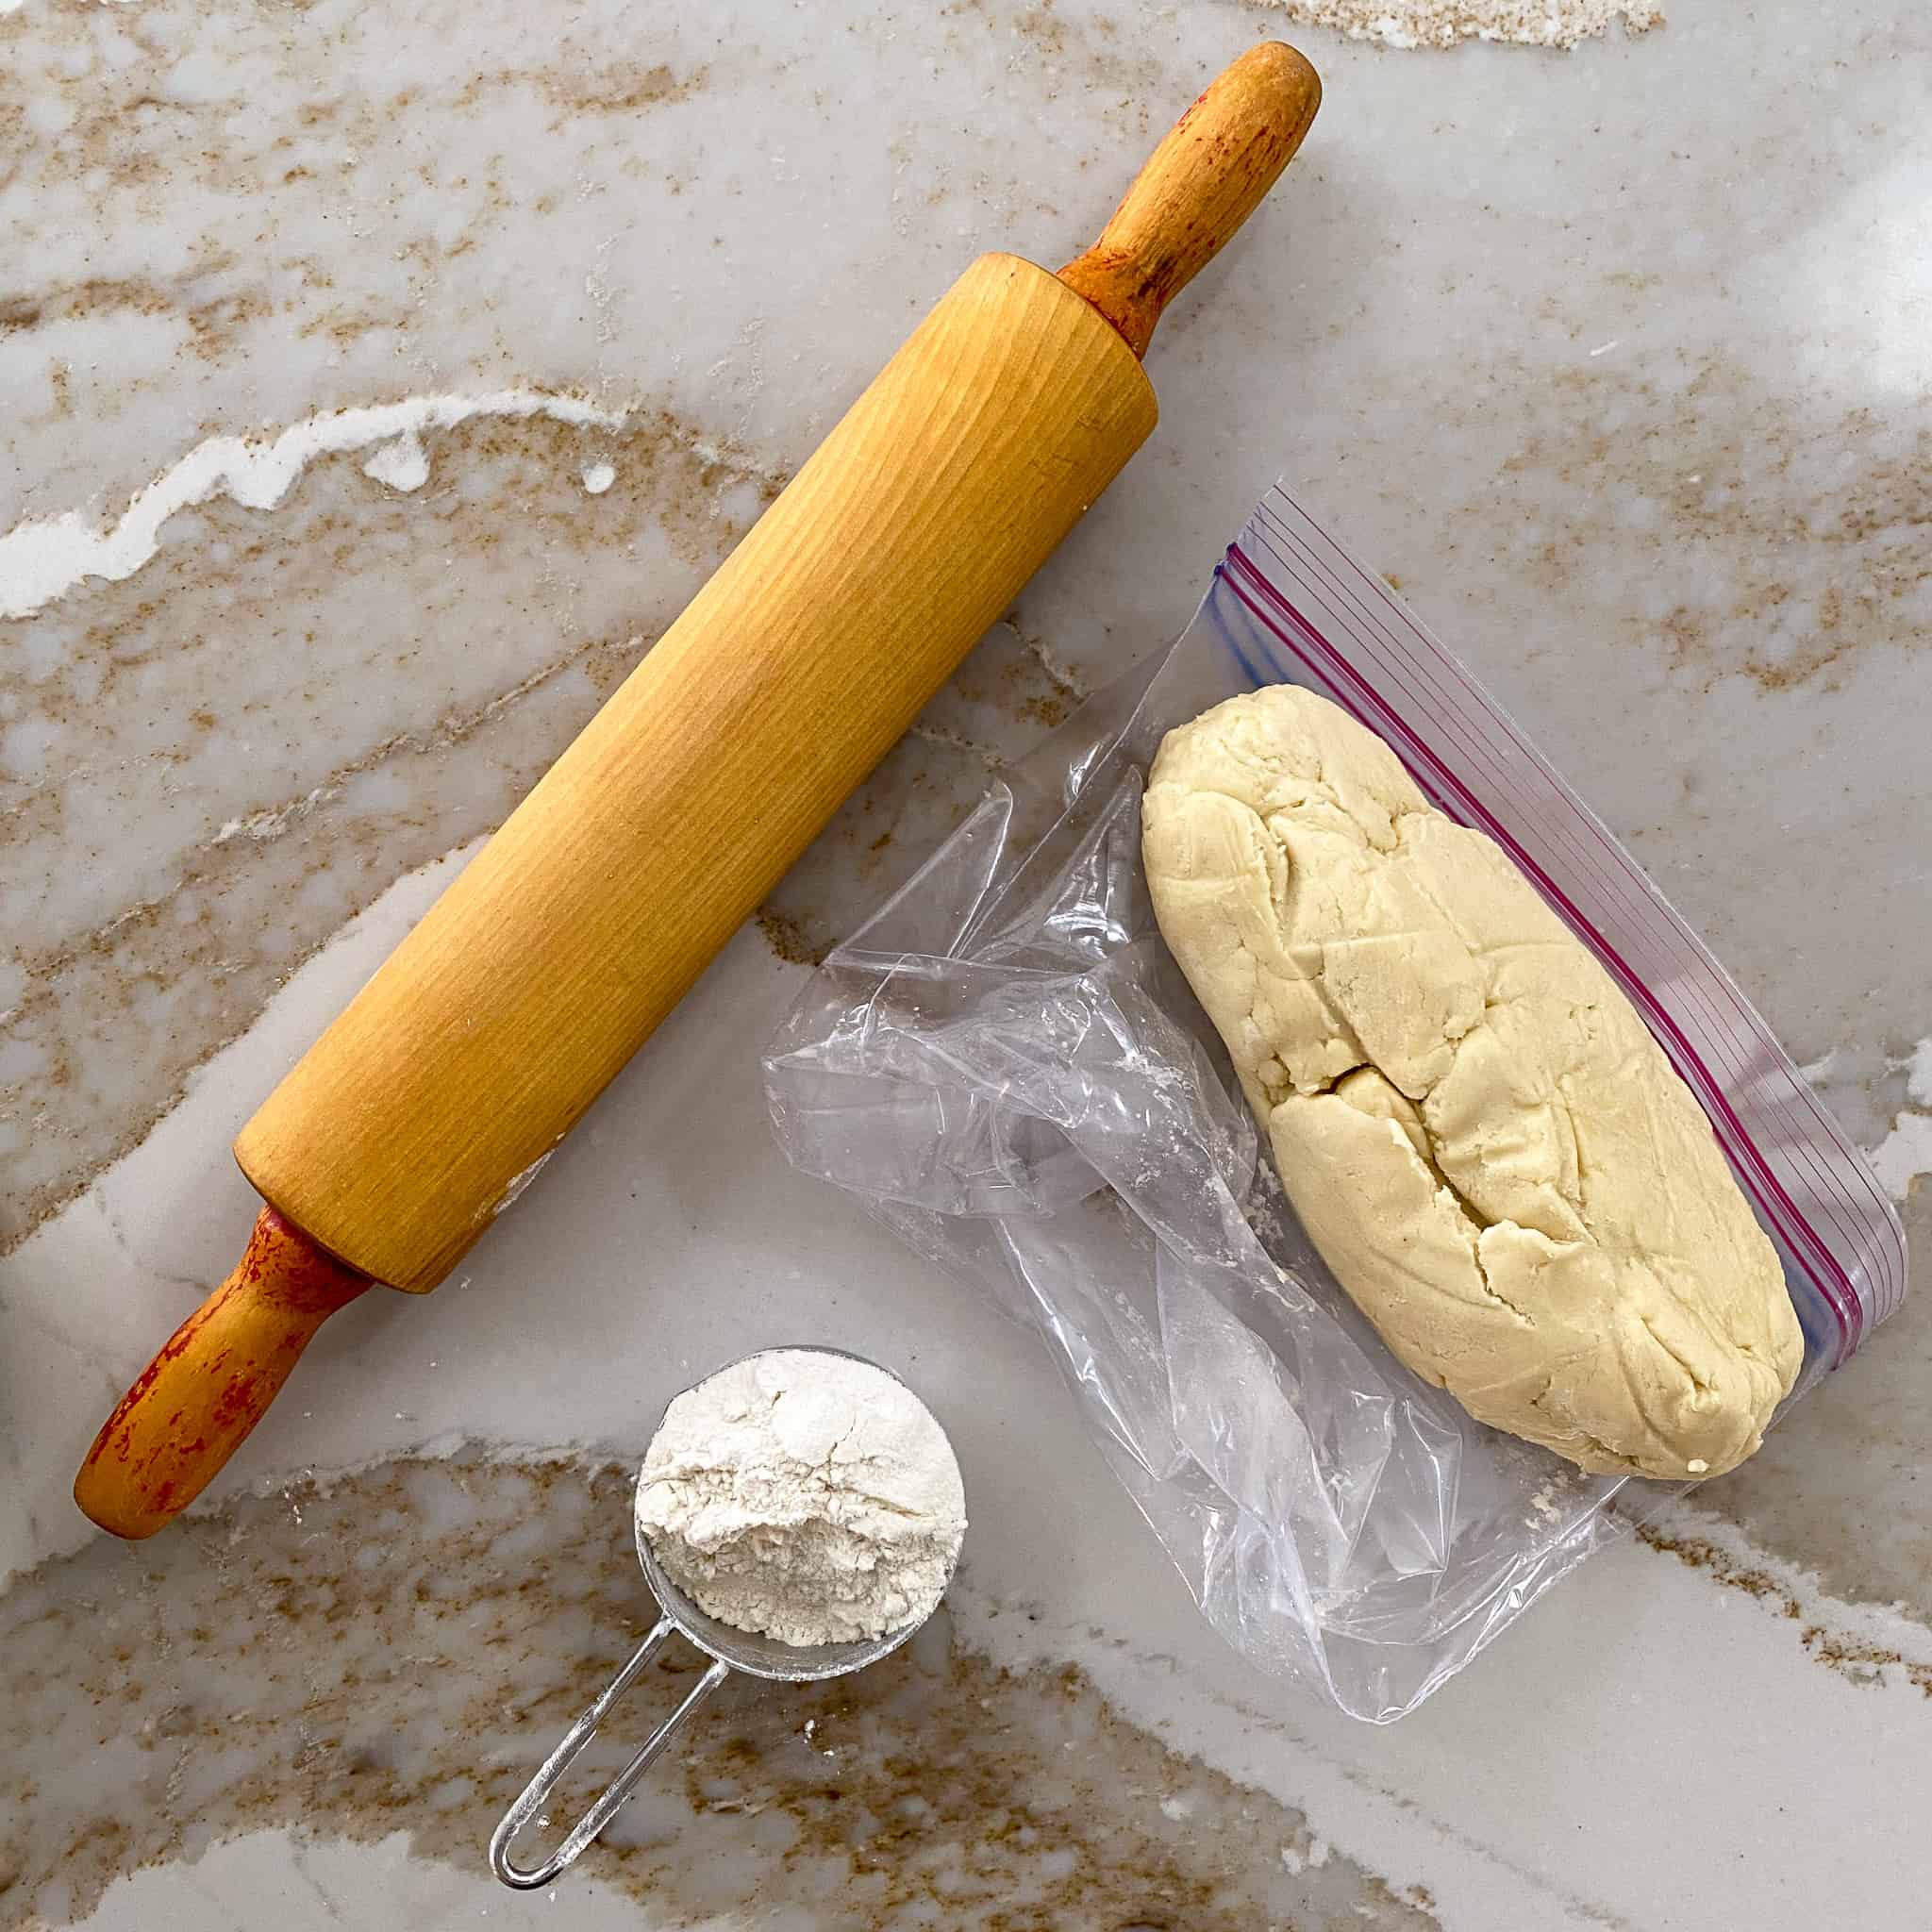 Rolling pin, dusting flour, and chilled cookie dough sitting on the counter ready to roll out.